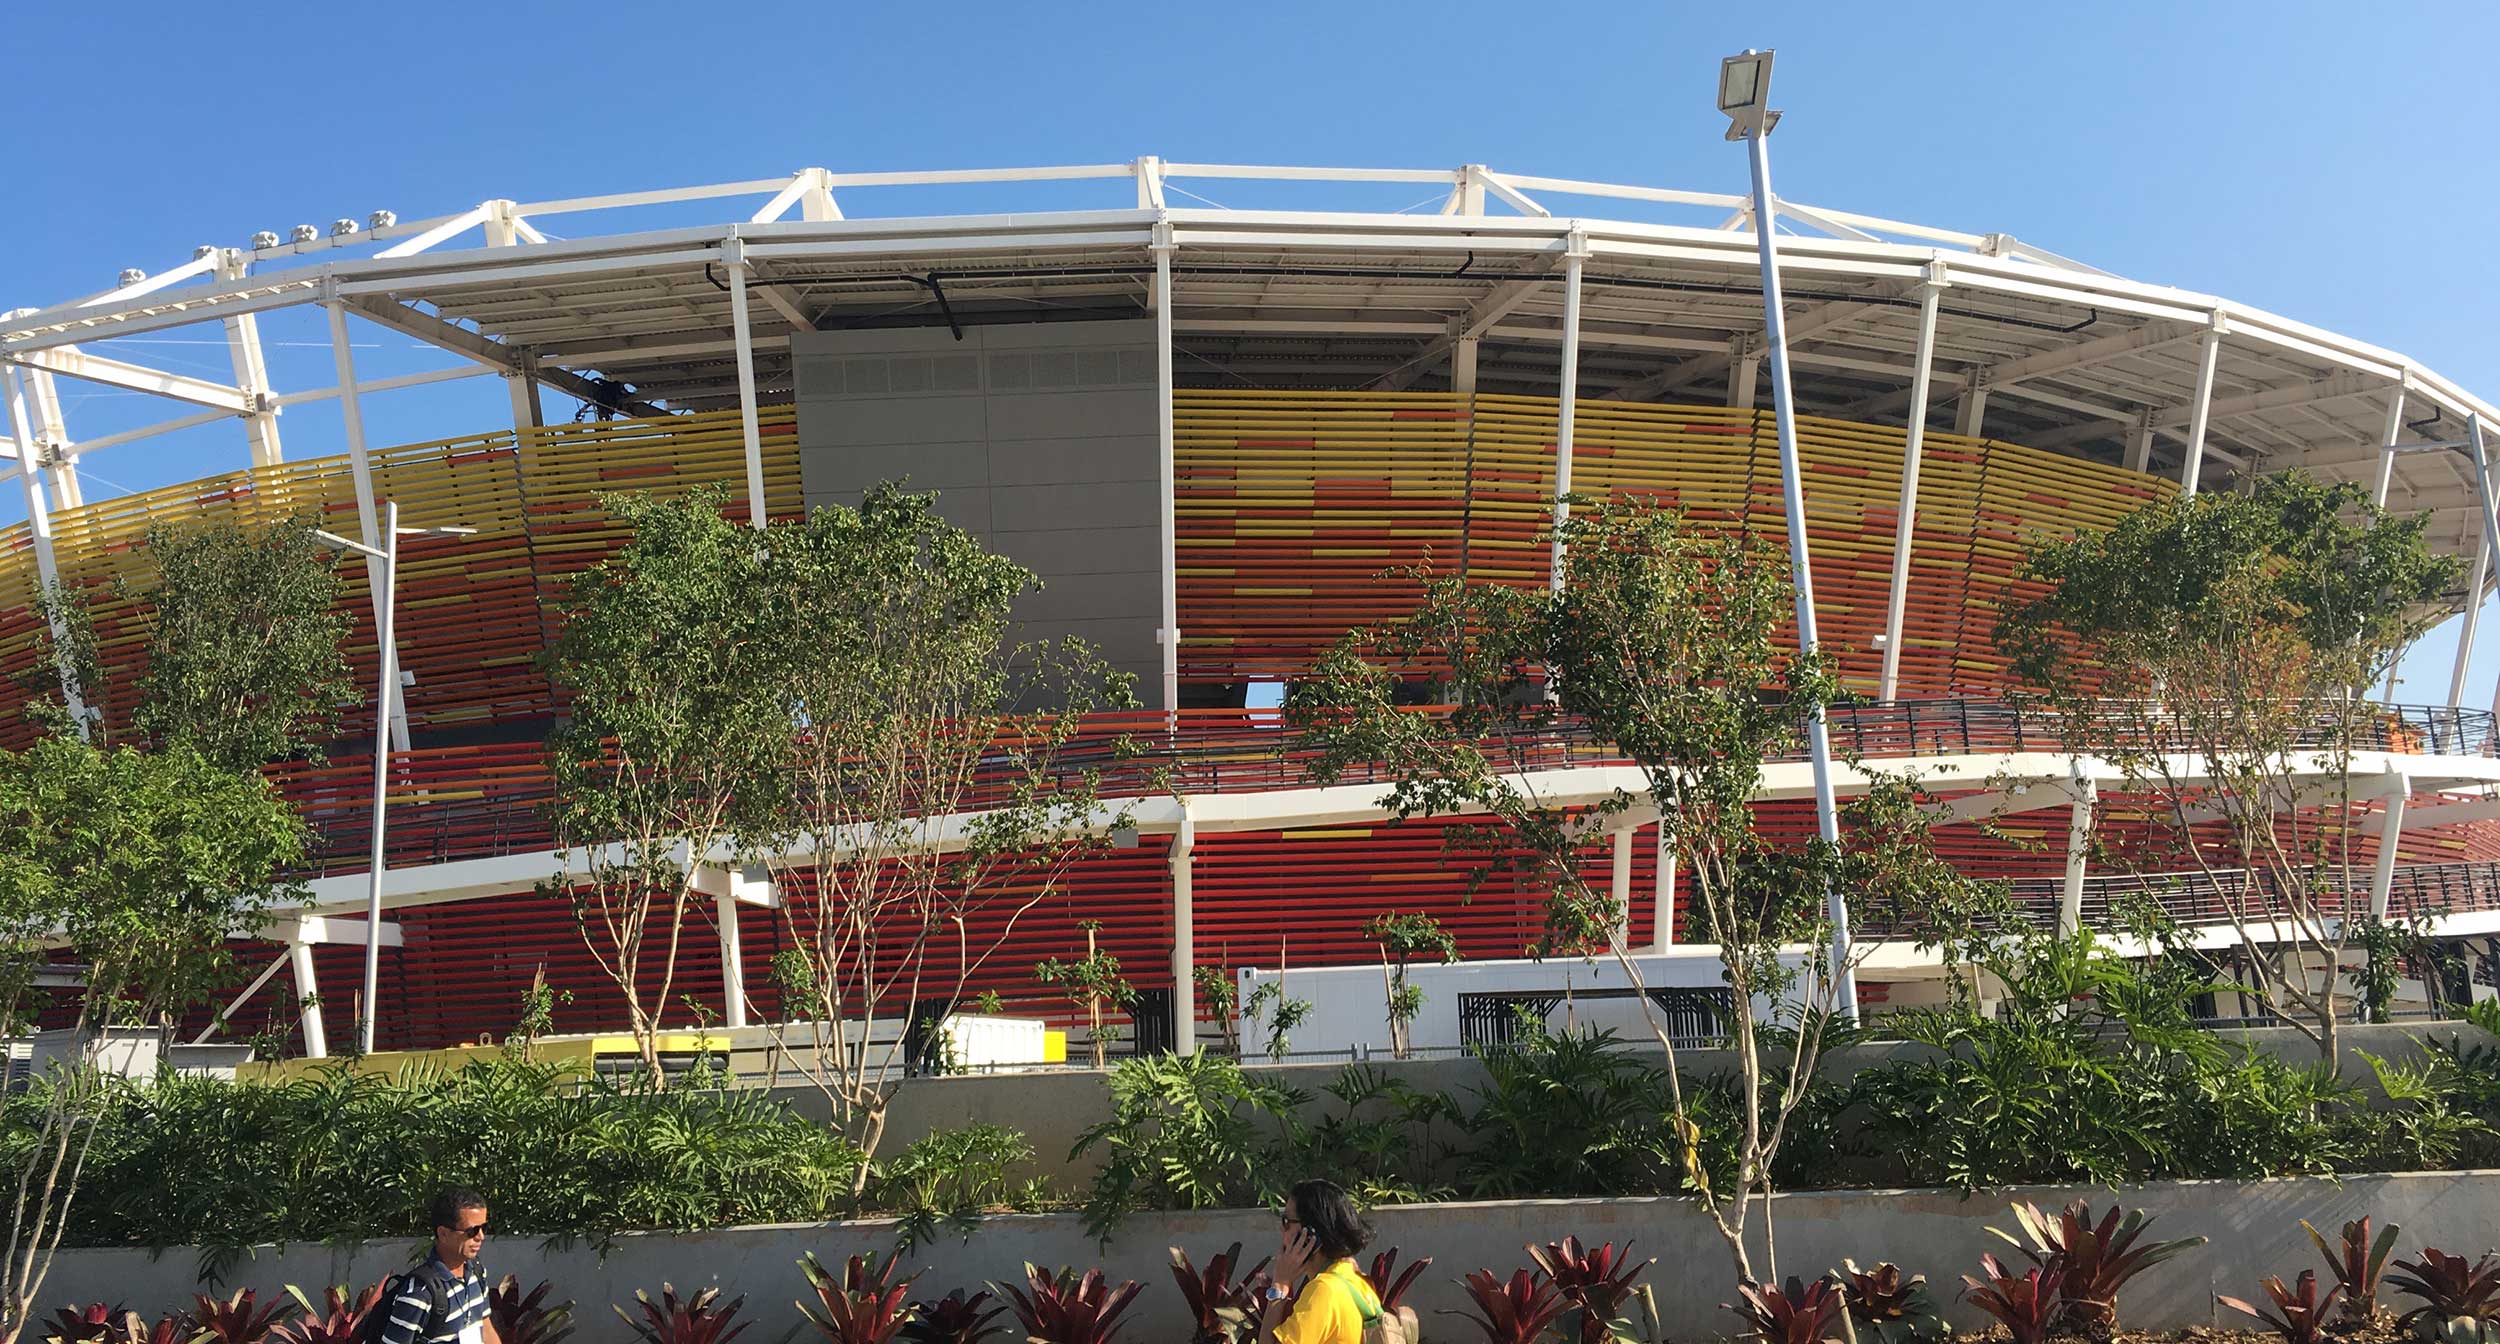 The outside of the tennis stadium in the Olympic Park in Rio de Janeiro, Brazil